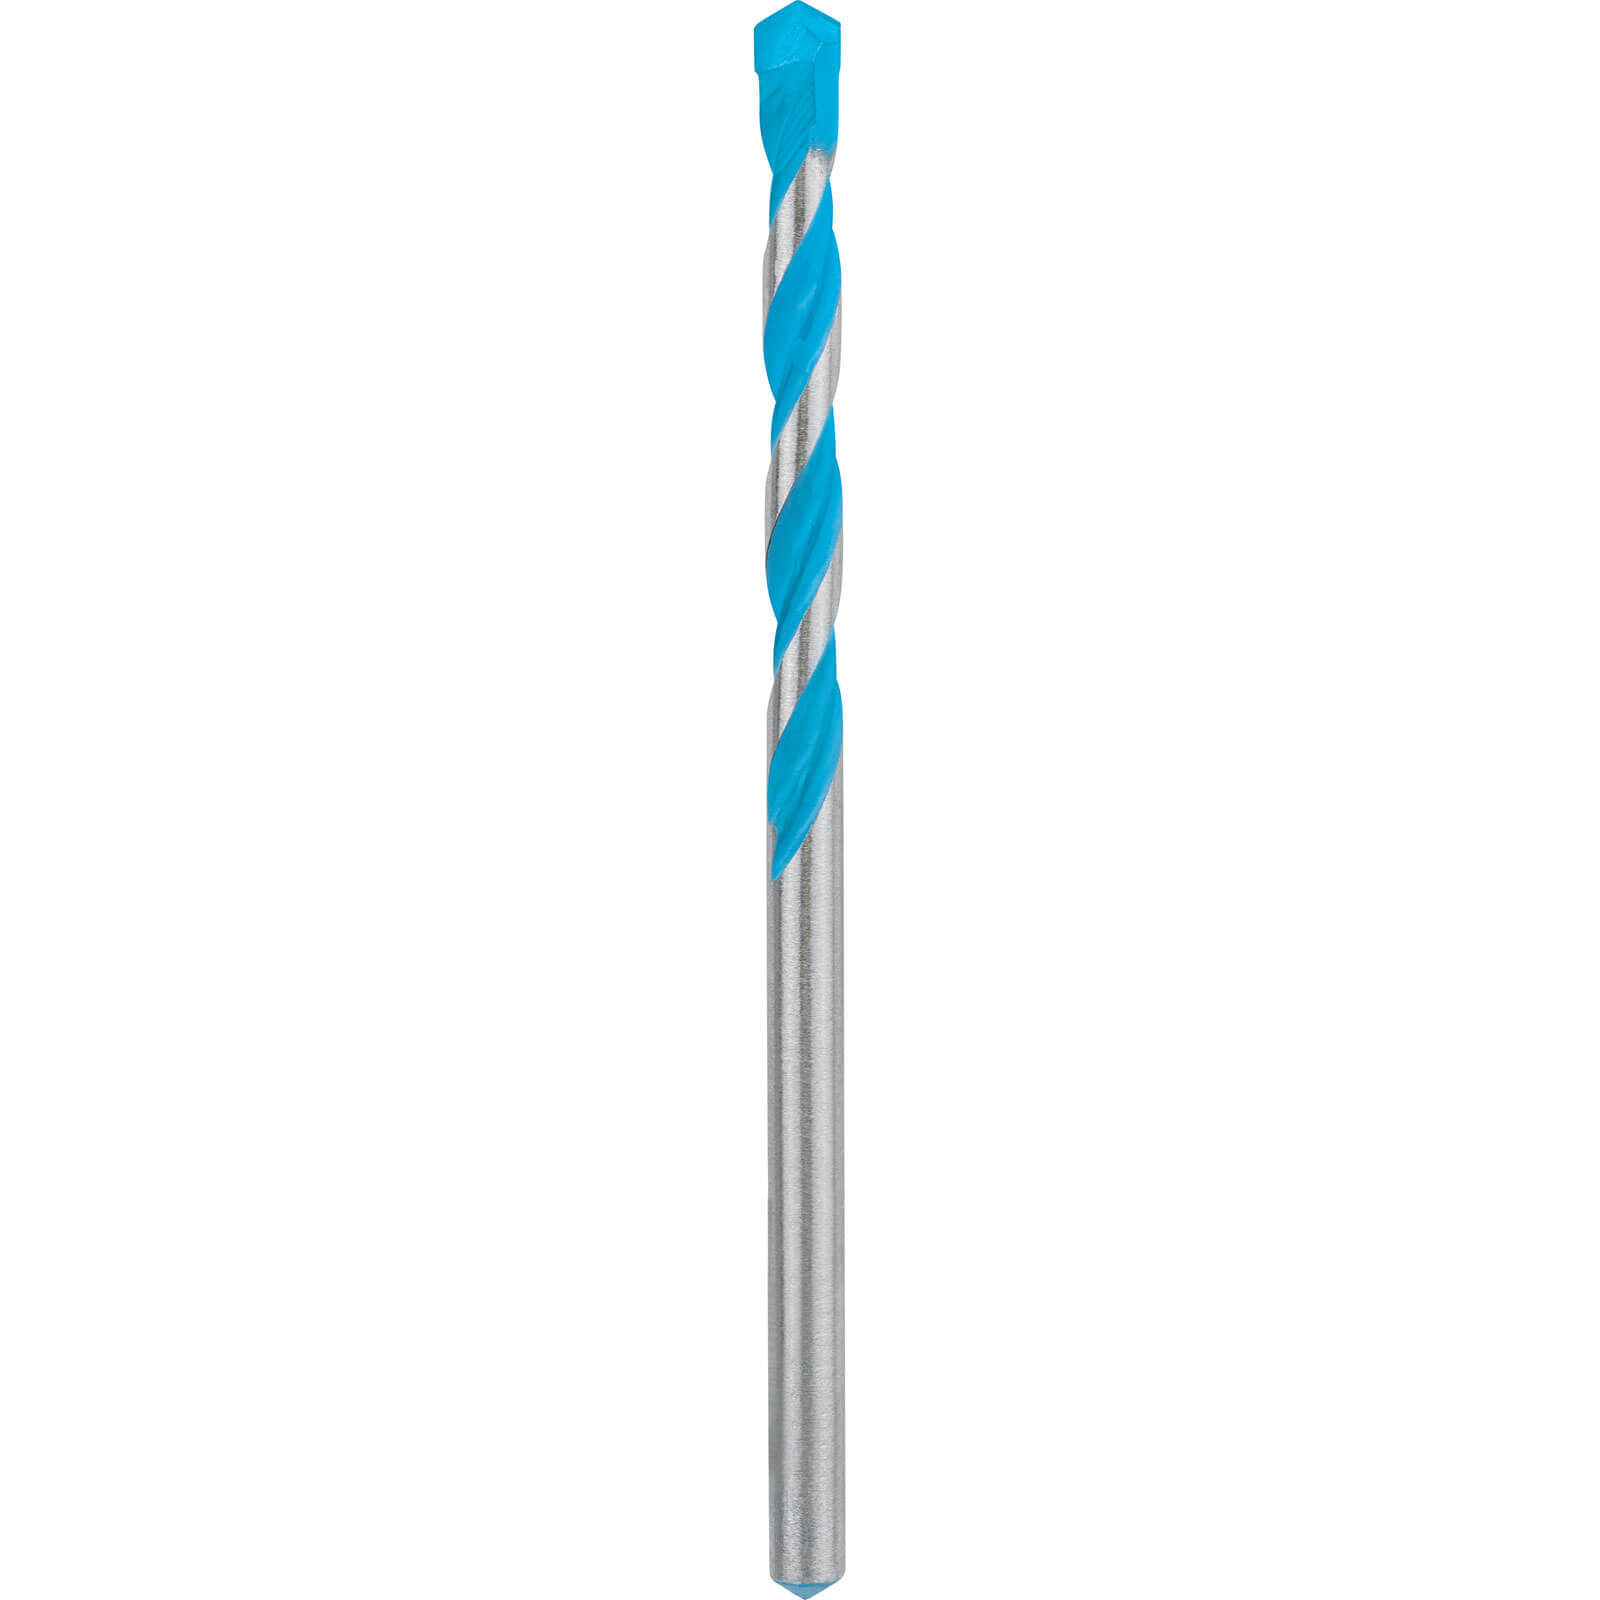 Photo of Bosch Expert Cyl-9 Multi Construction Drill Bit 4mm 75mm Pack Of 1